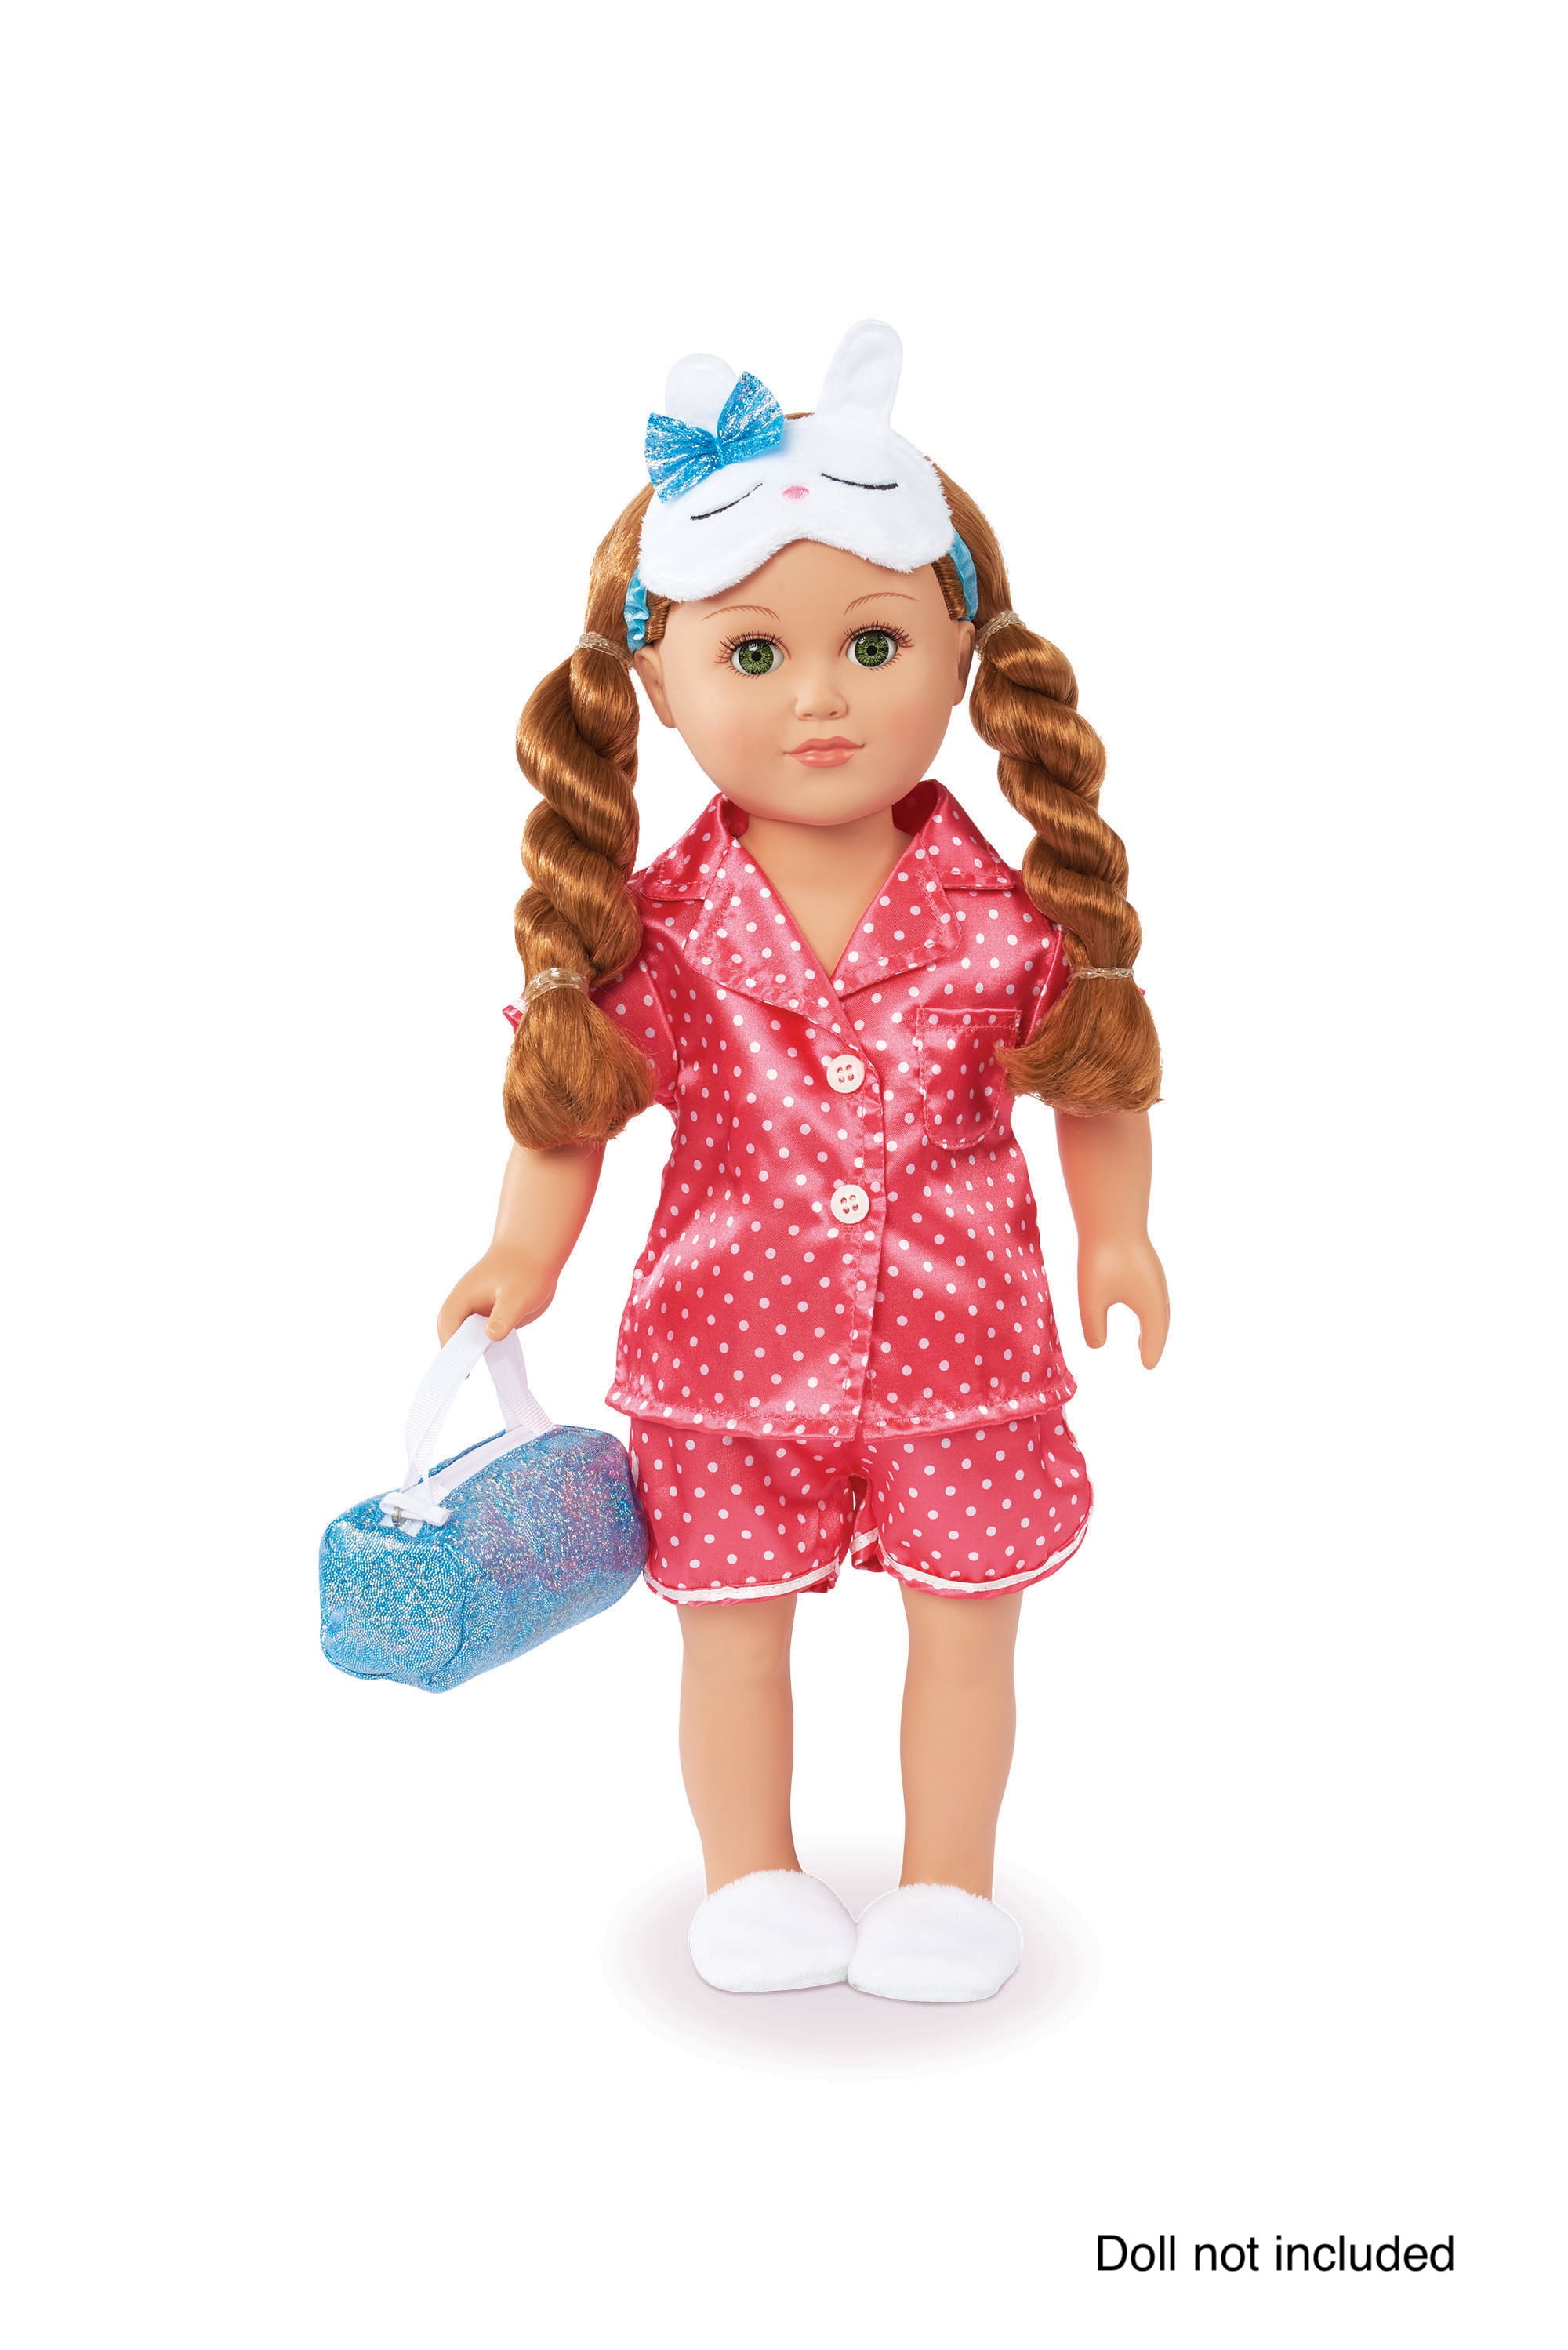 My Life As Blue & Rainbow Dream Pajama Outfit for 18-Inch Doll